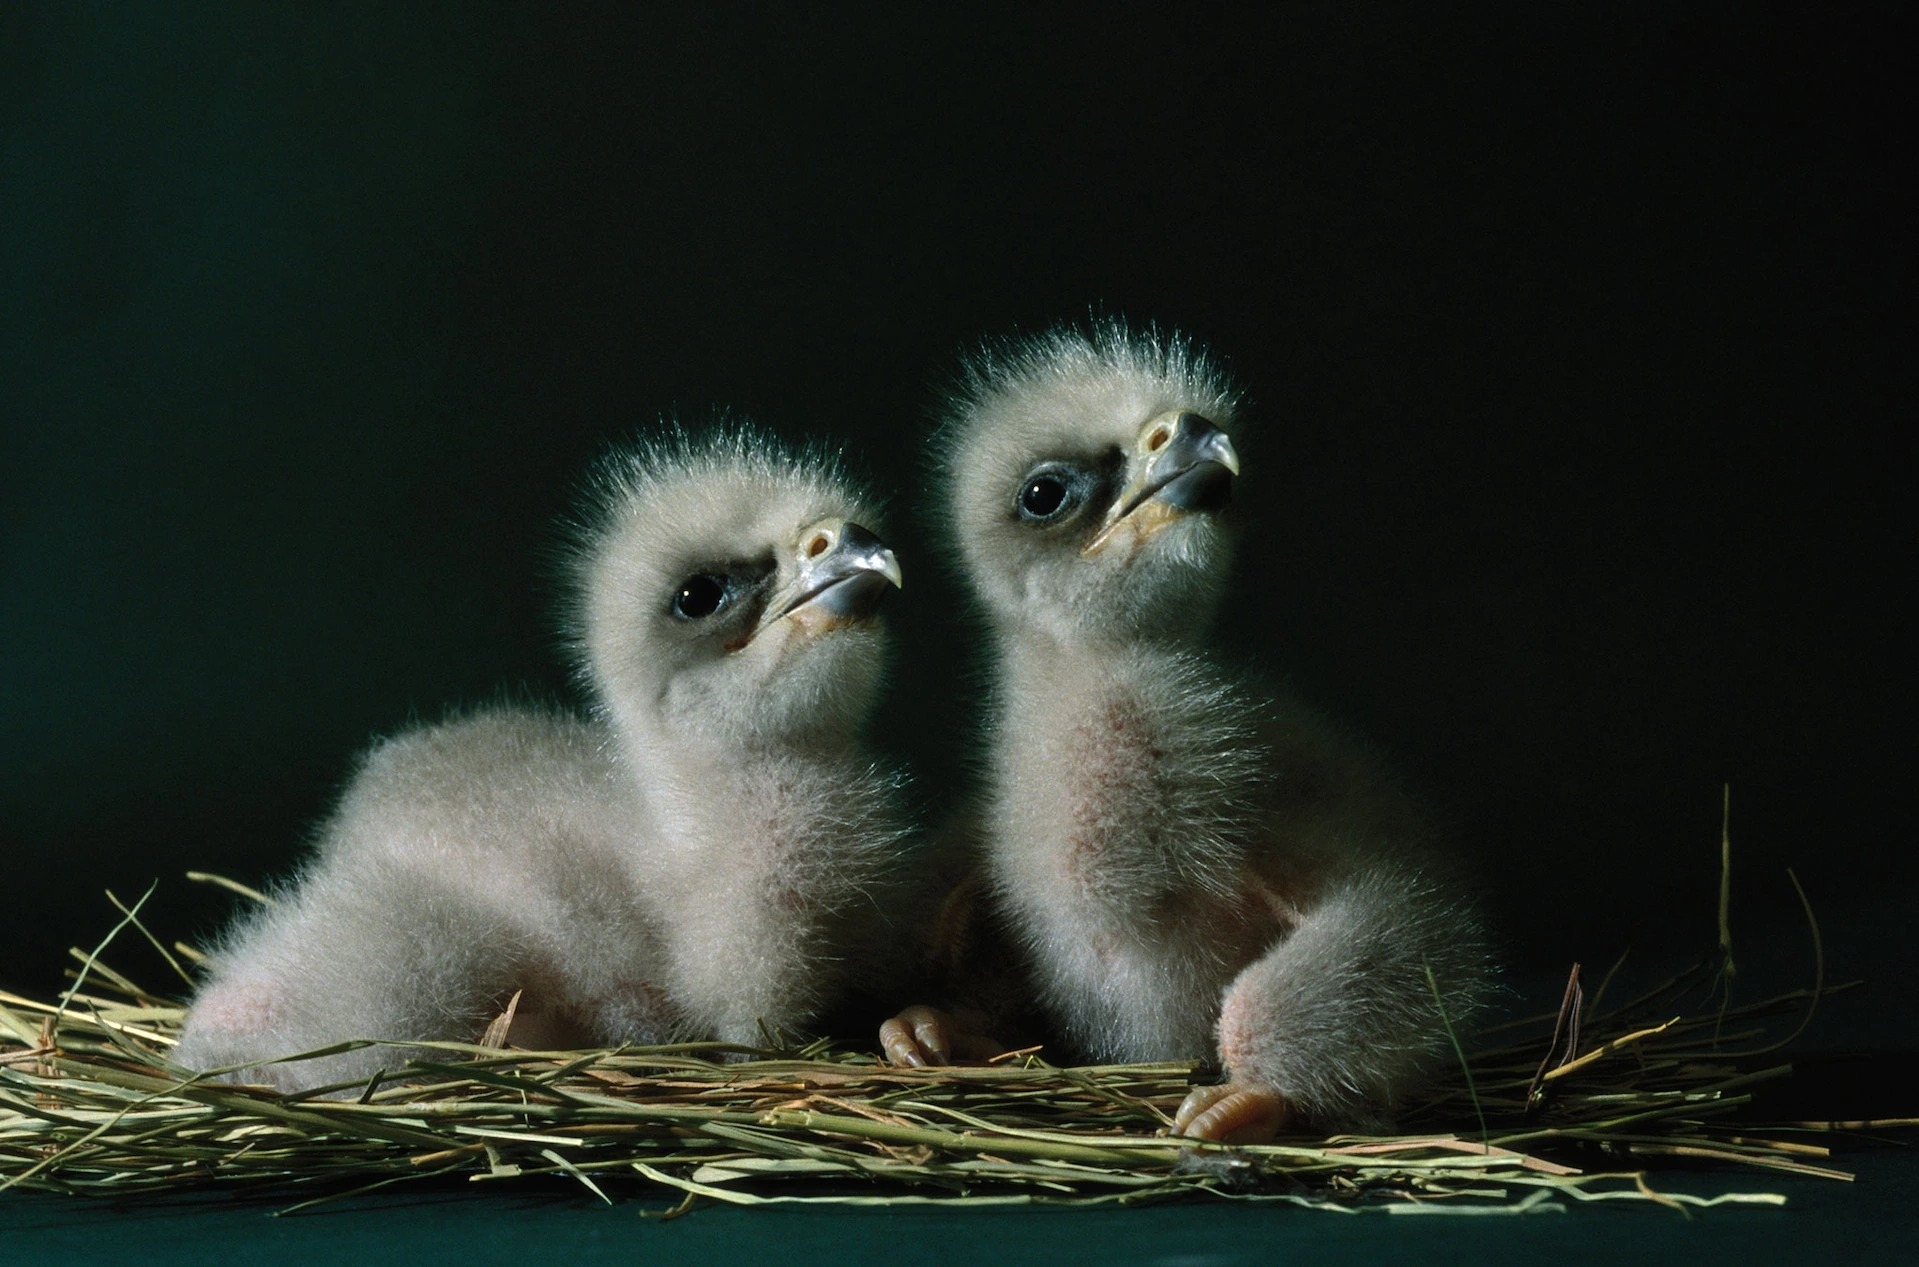 Photograph by Joel Sartore, Nat Geo Image Collection